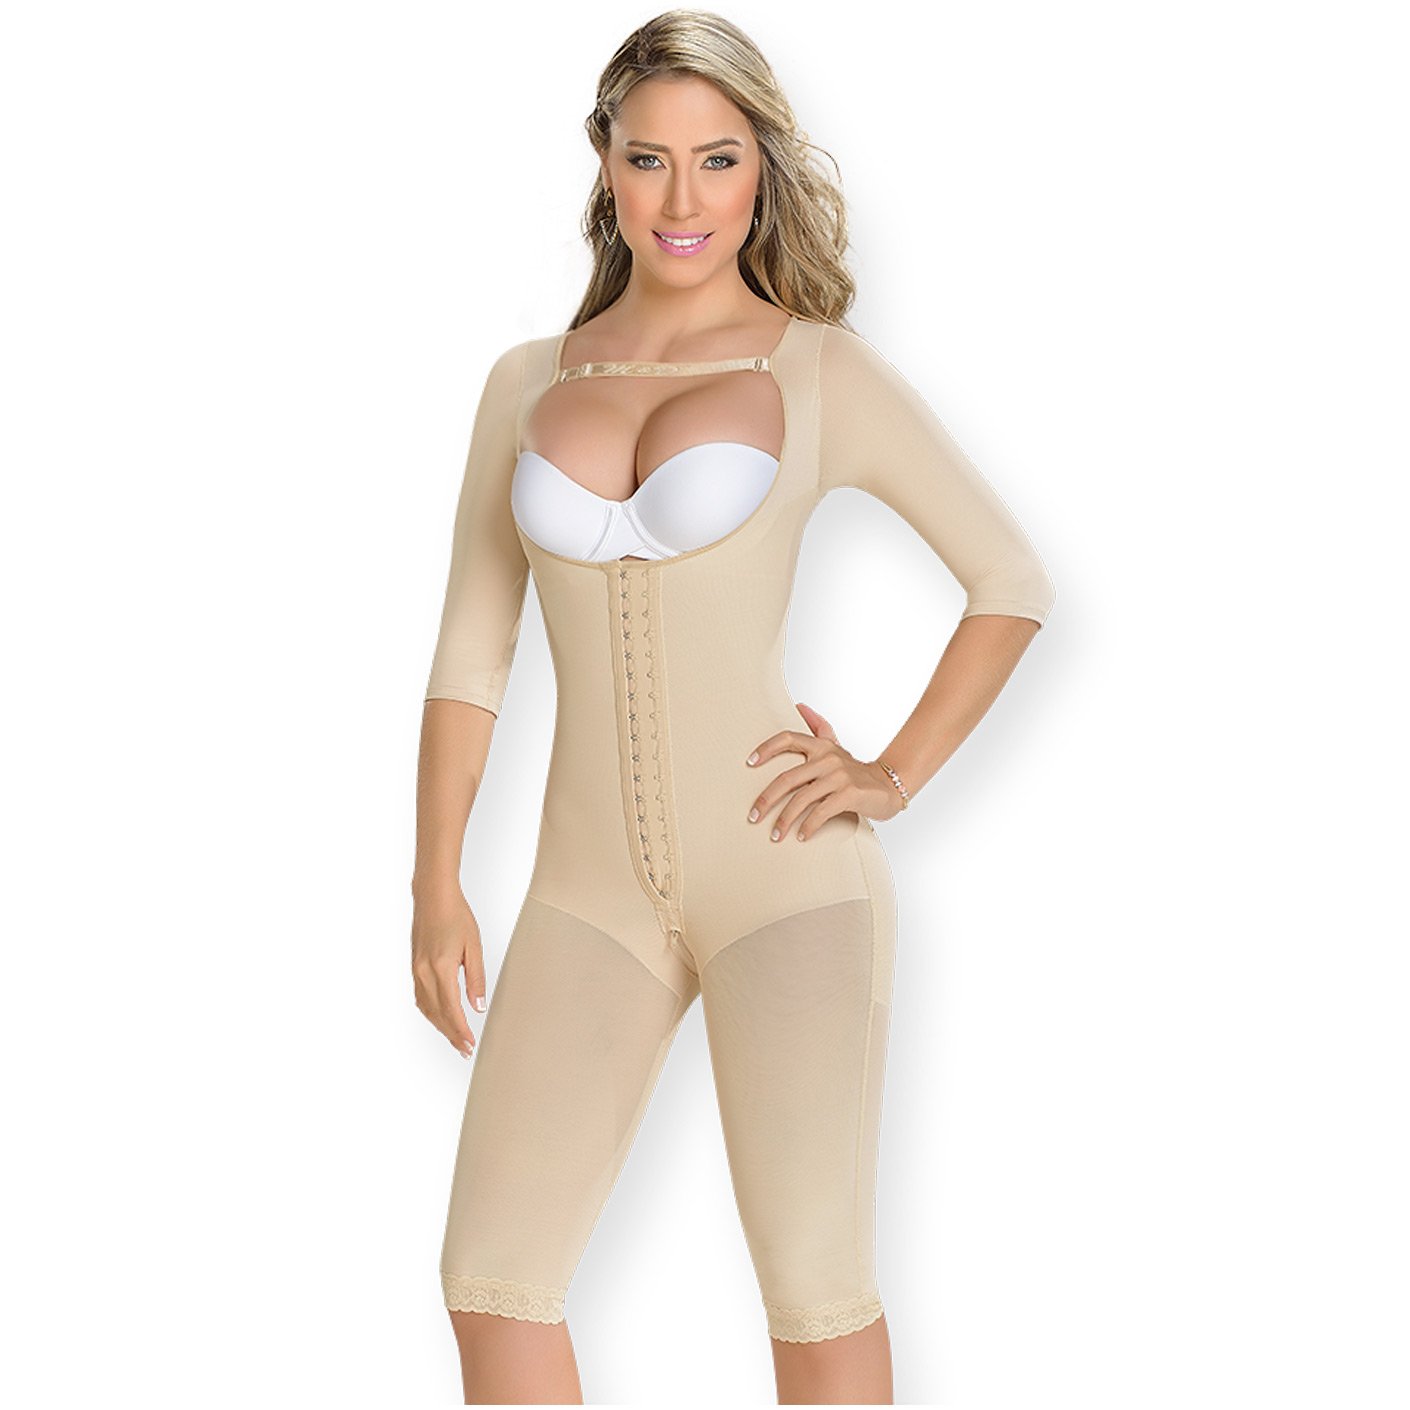 M&D Shapewear: 0074 - Post Surgical Full Body Compression Shaping Garment